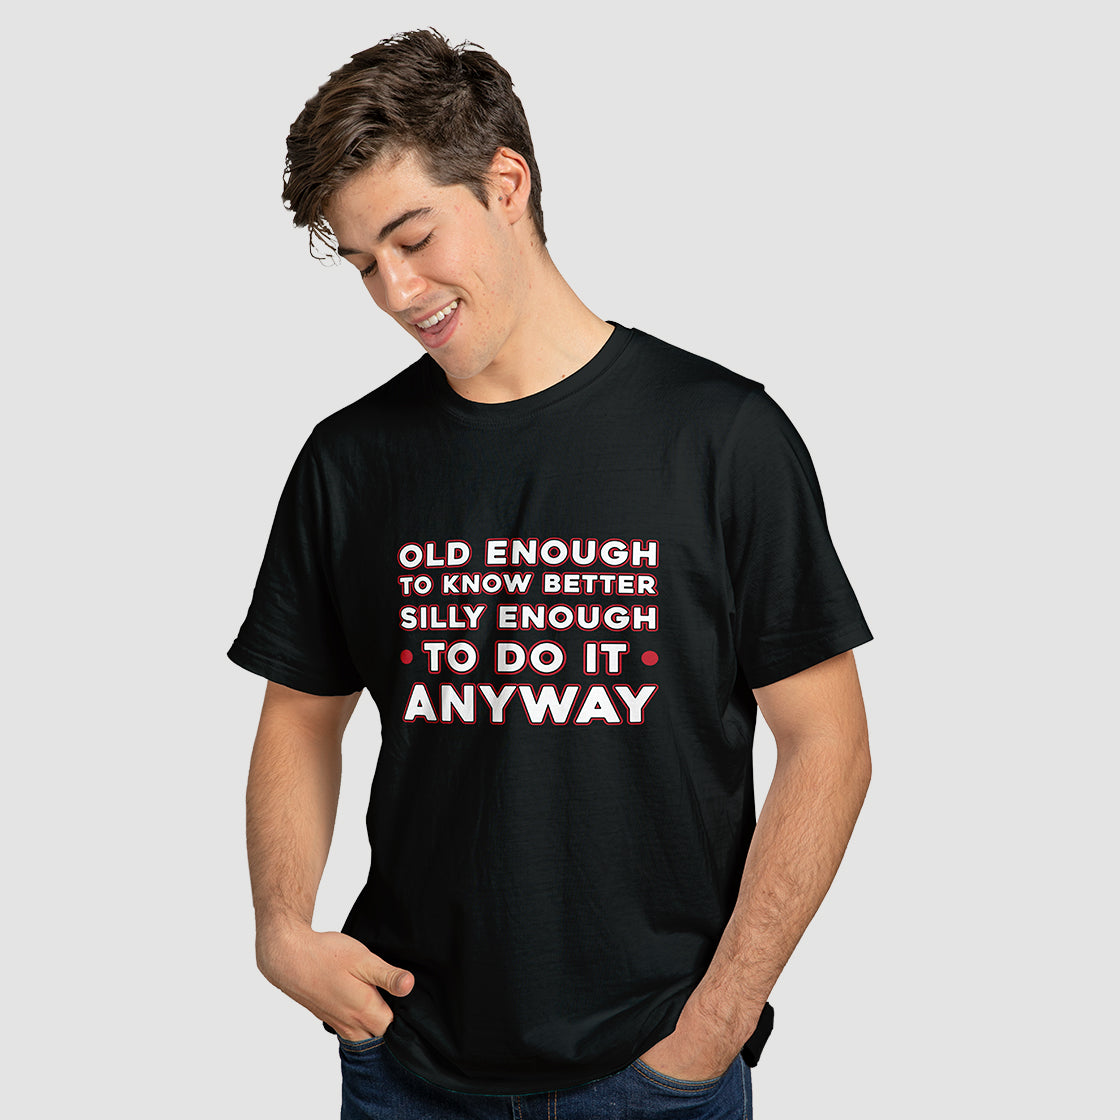 "Old Enough to know Better" T-Shirt